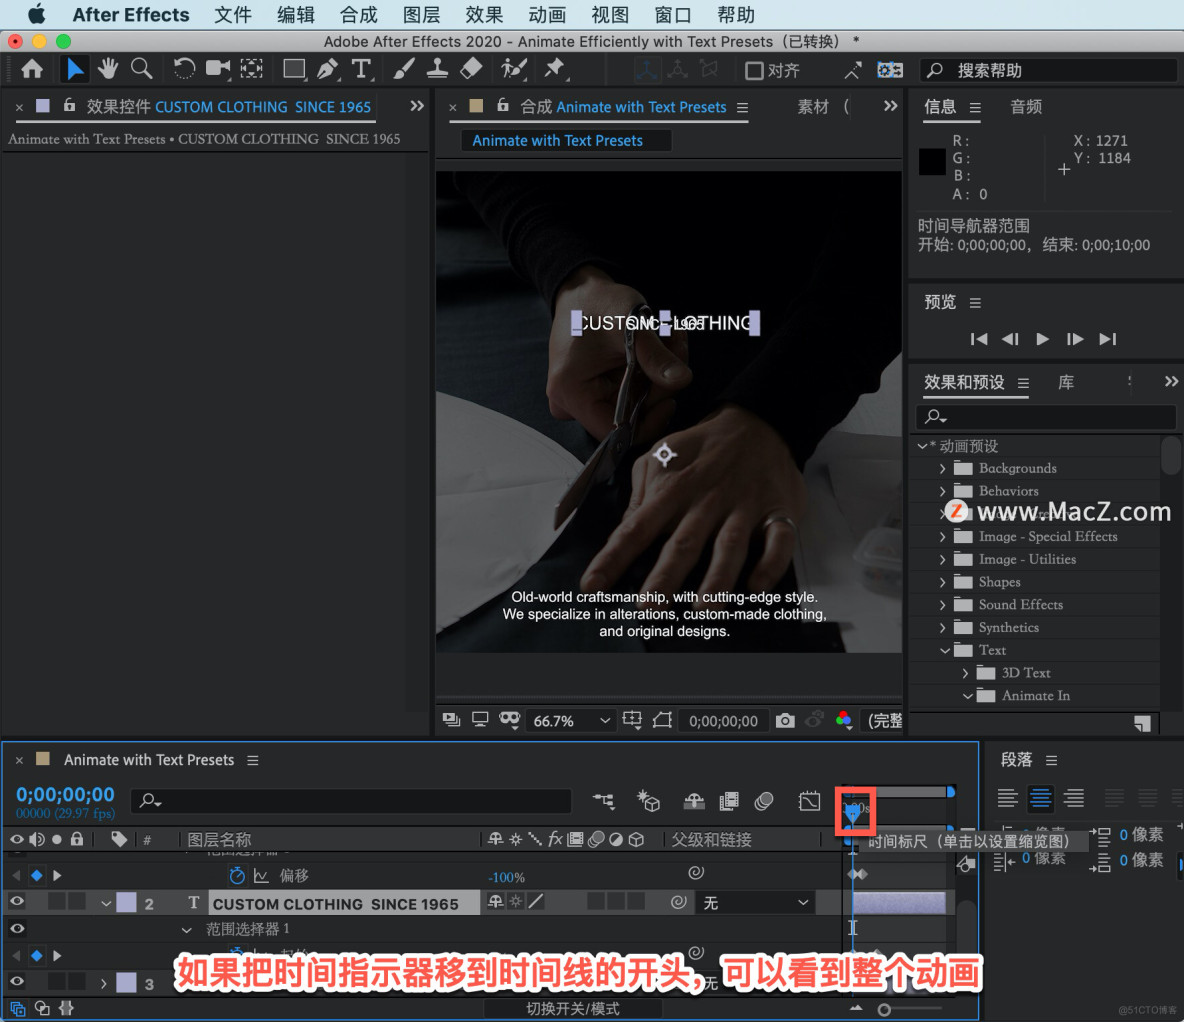 After Effects 教程，如何在 After Effects 中更改动画计时？_After Effects_10